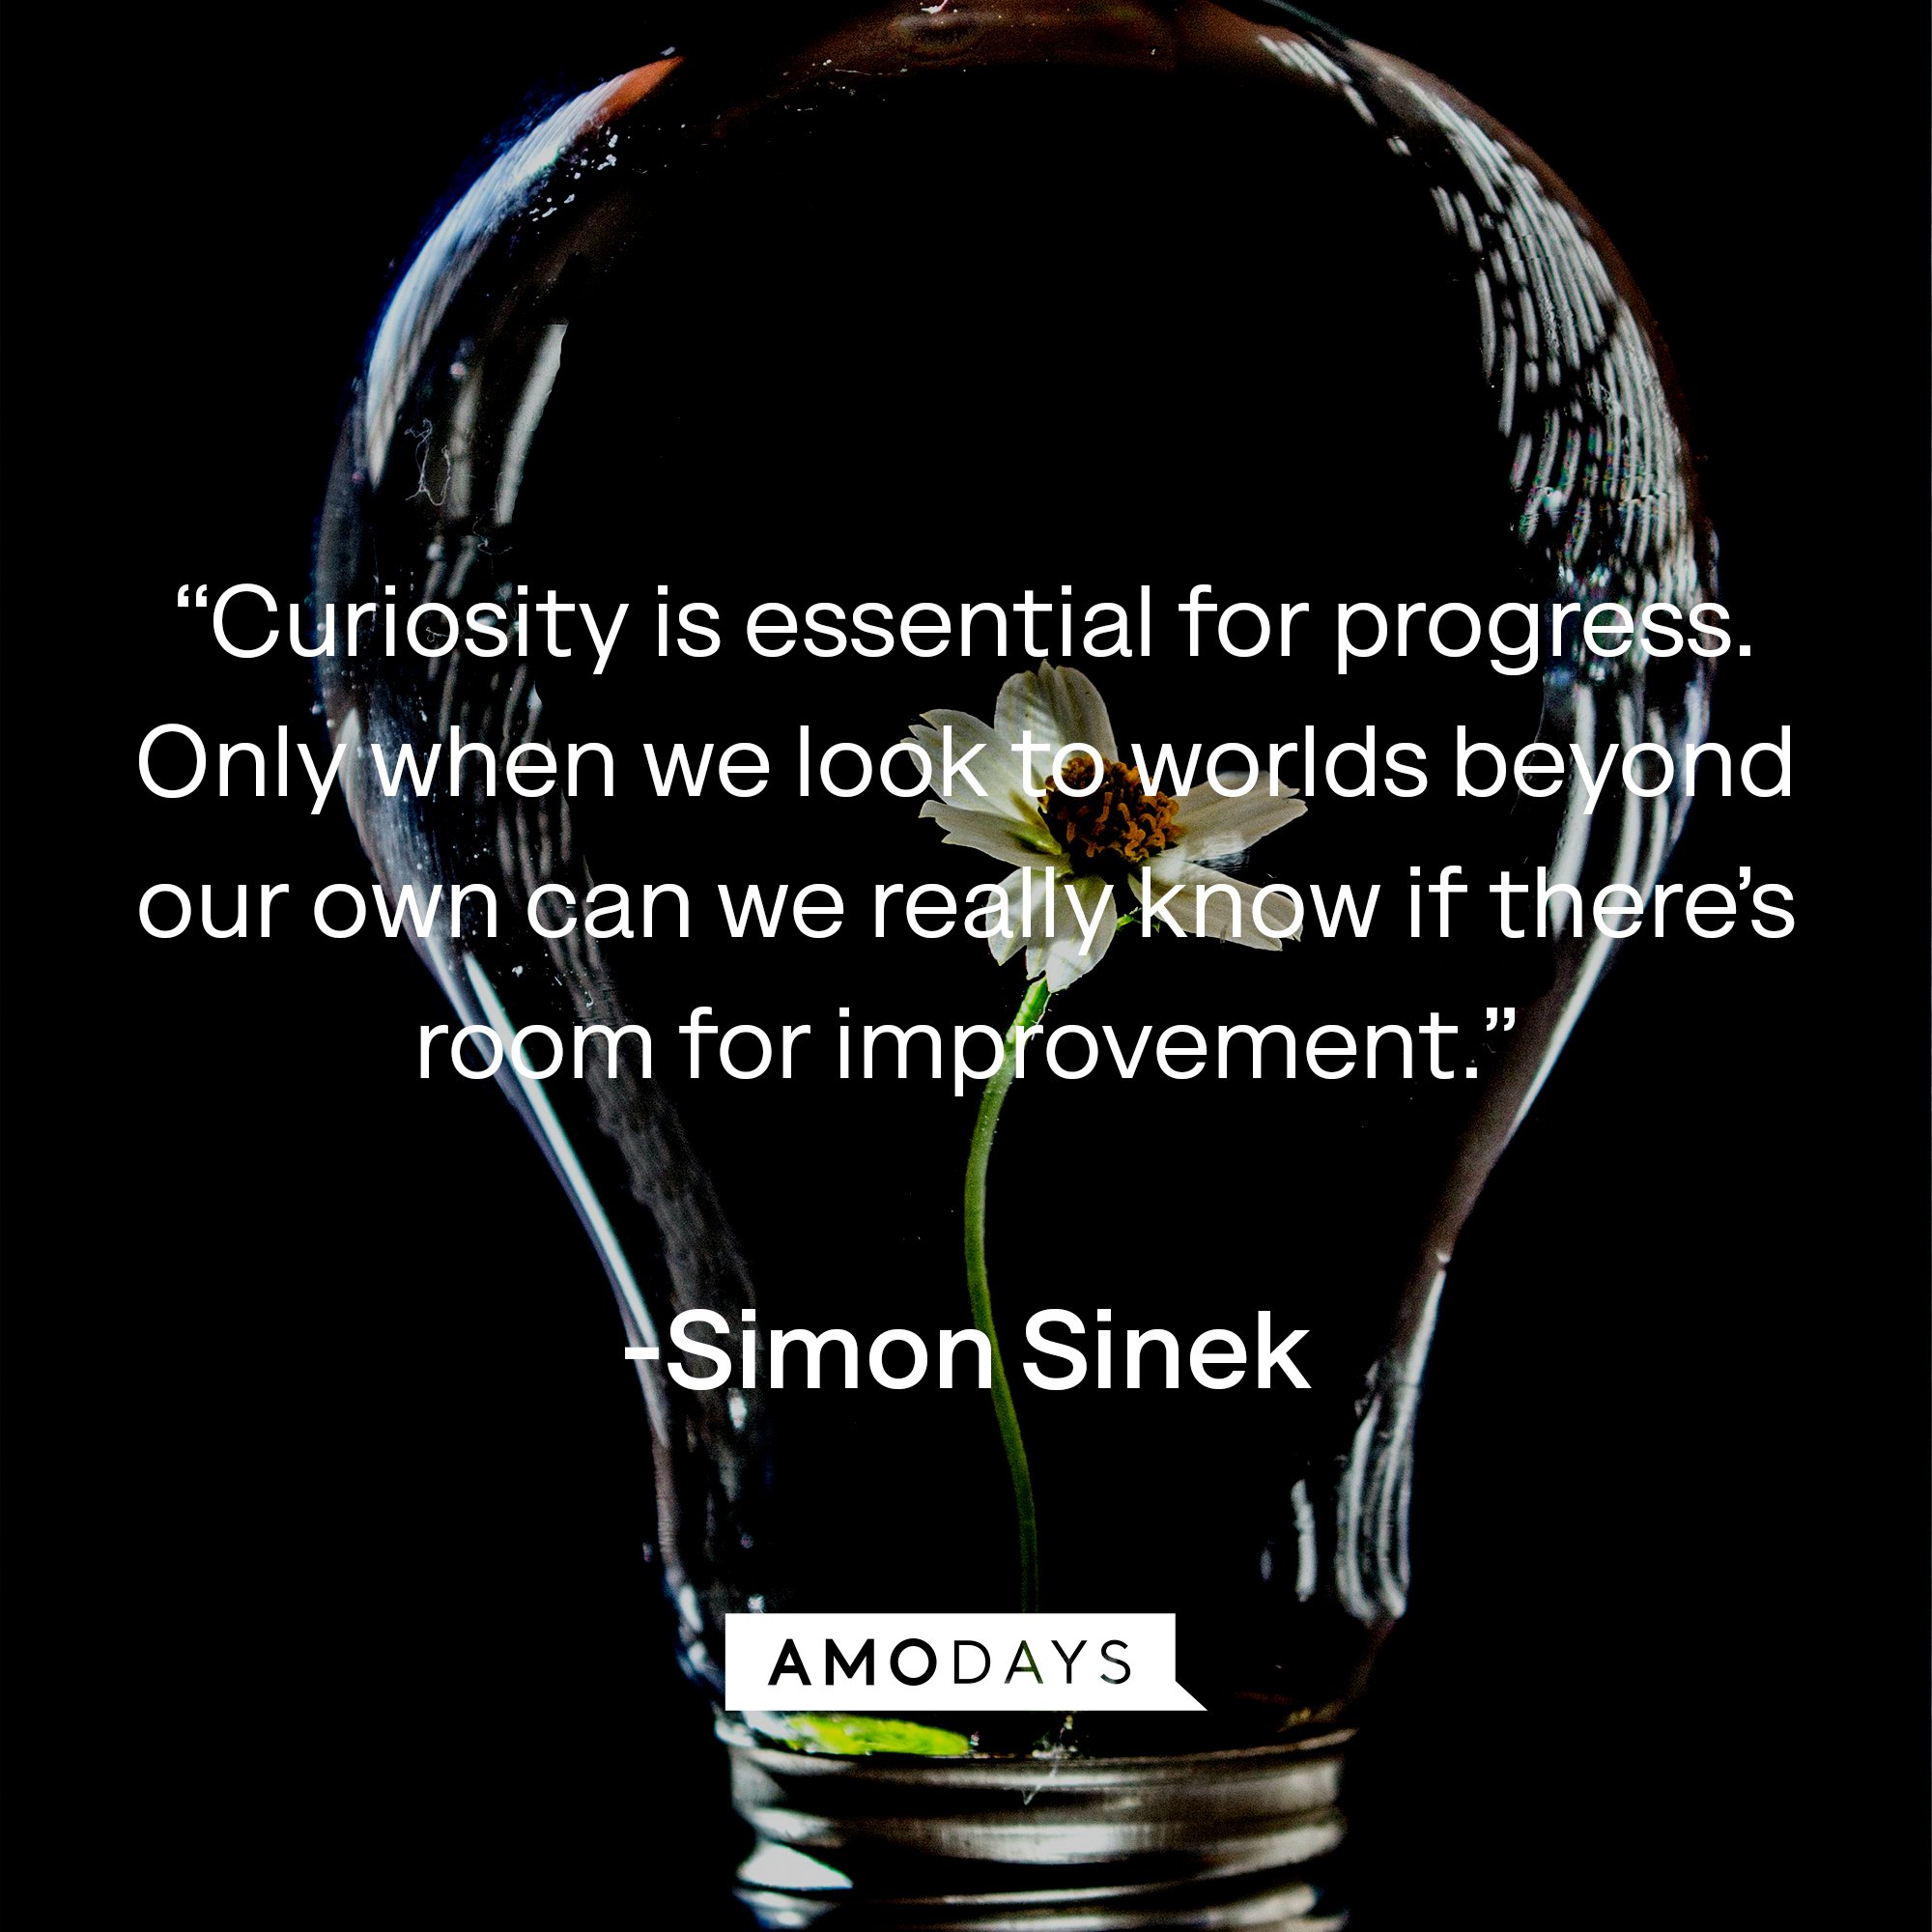 Simon Sinek 's quote: “Curiosity is essential for progress. Only when we look to worlds beyond our own can we really know if there’s room for improvement.” | Image: AmoDays  